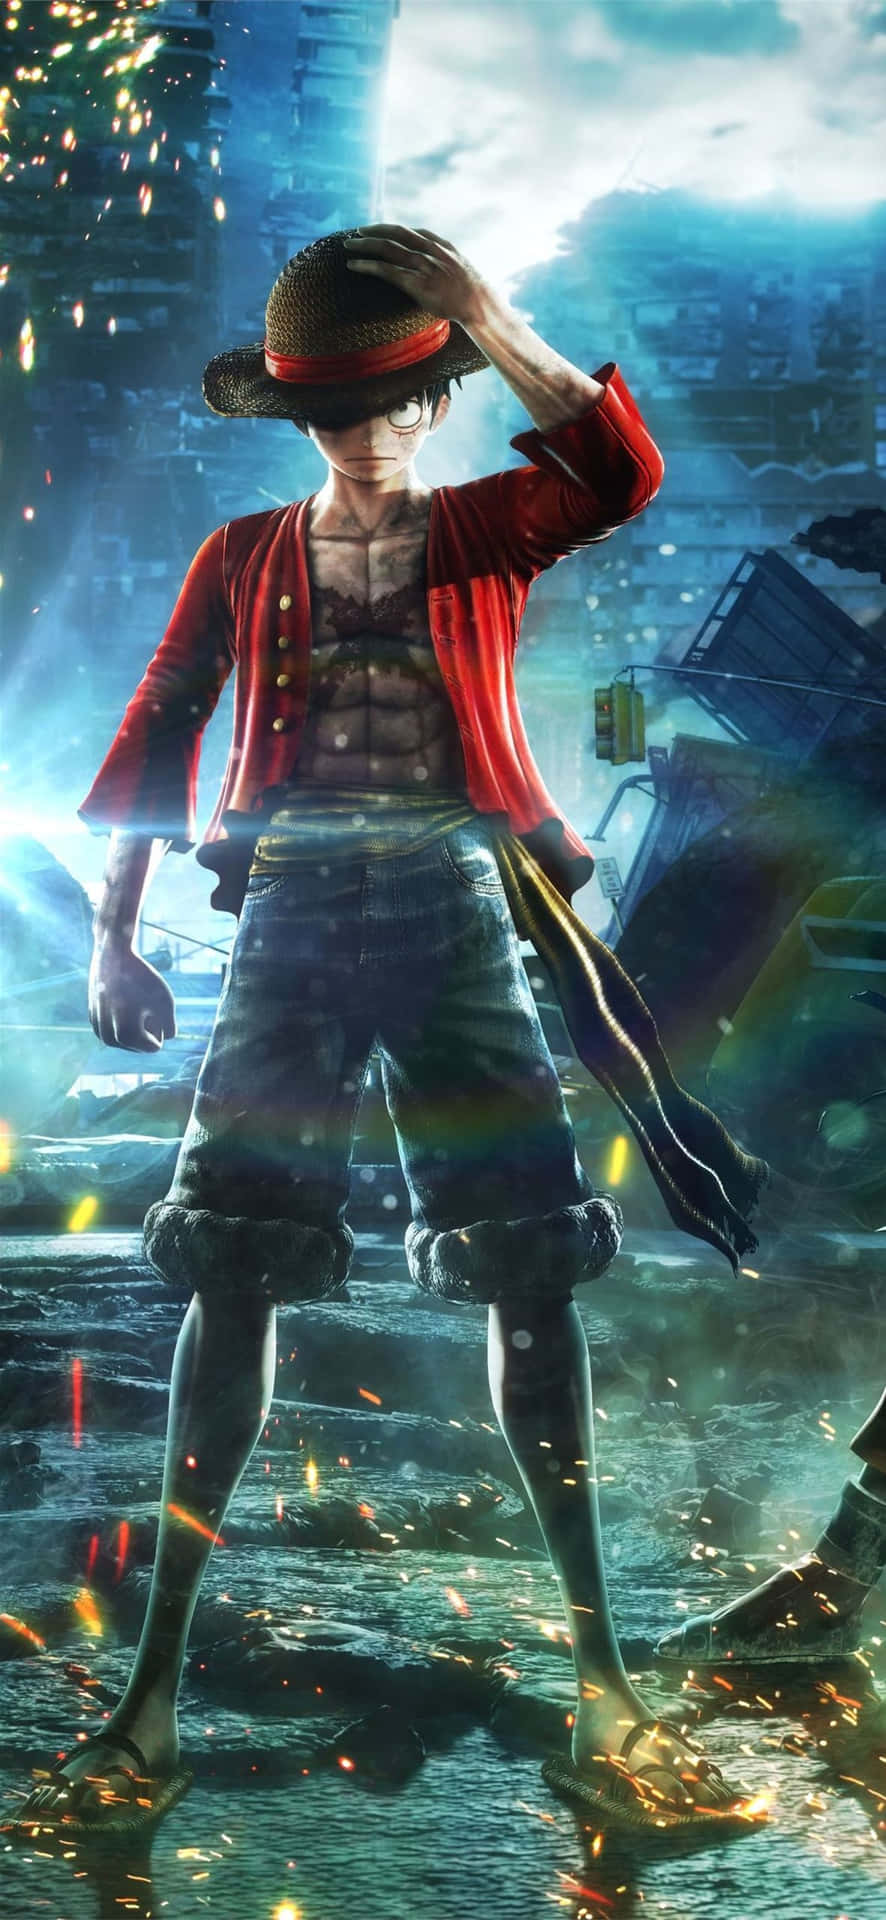 Own the adventurous journey of Luffy with the One Piece Luffy Iphone Wallpaper